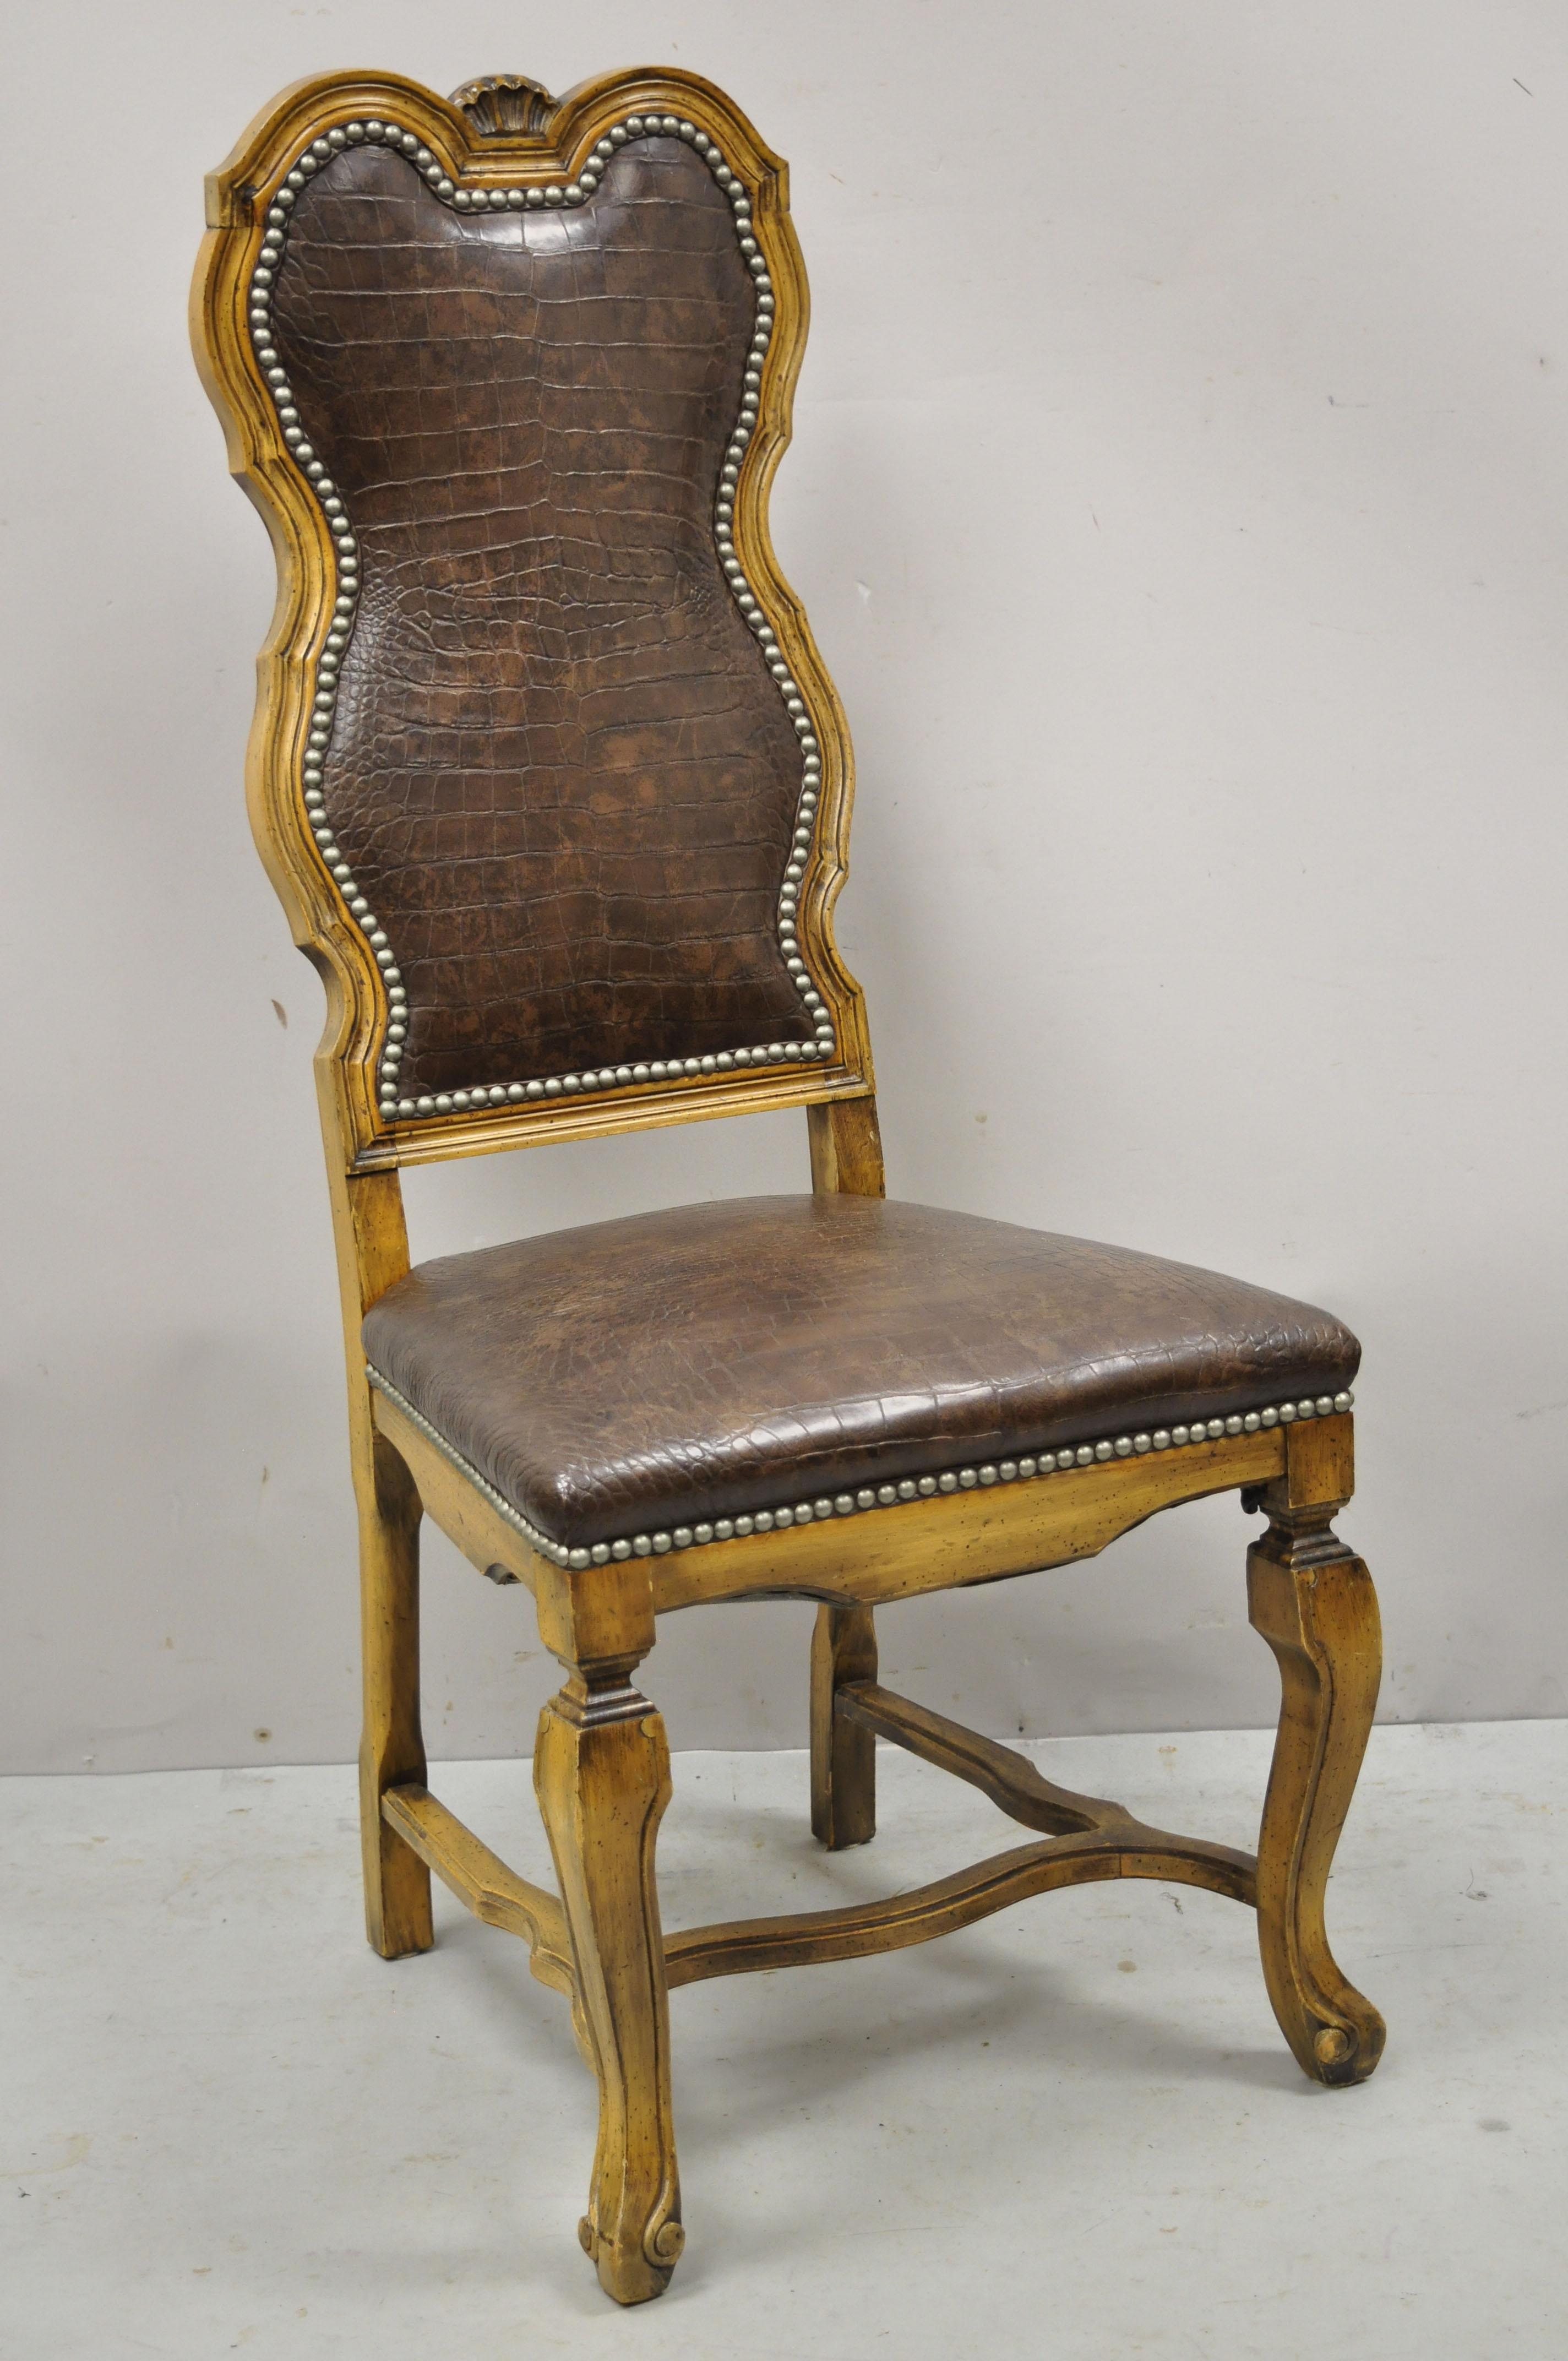 Italian Baroque Rococo Style carved wood brown reptile print dining chairs - set of 4. Item features brown faux reptile printed upholstery, nailhead trim, stretcher base, solid wood frame, distressed finish, nicely carved details, very nice set,